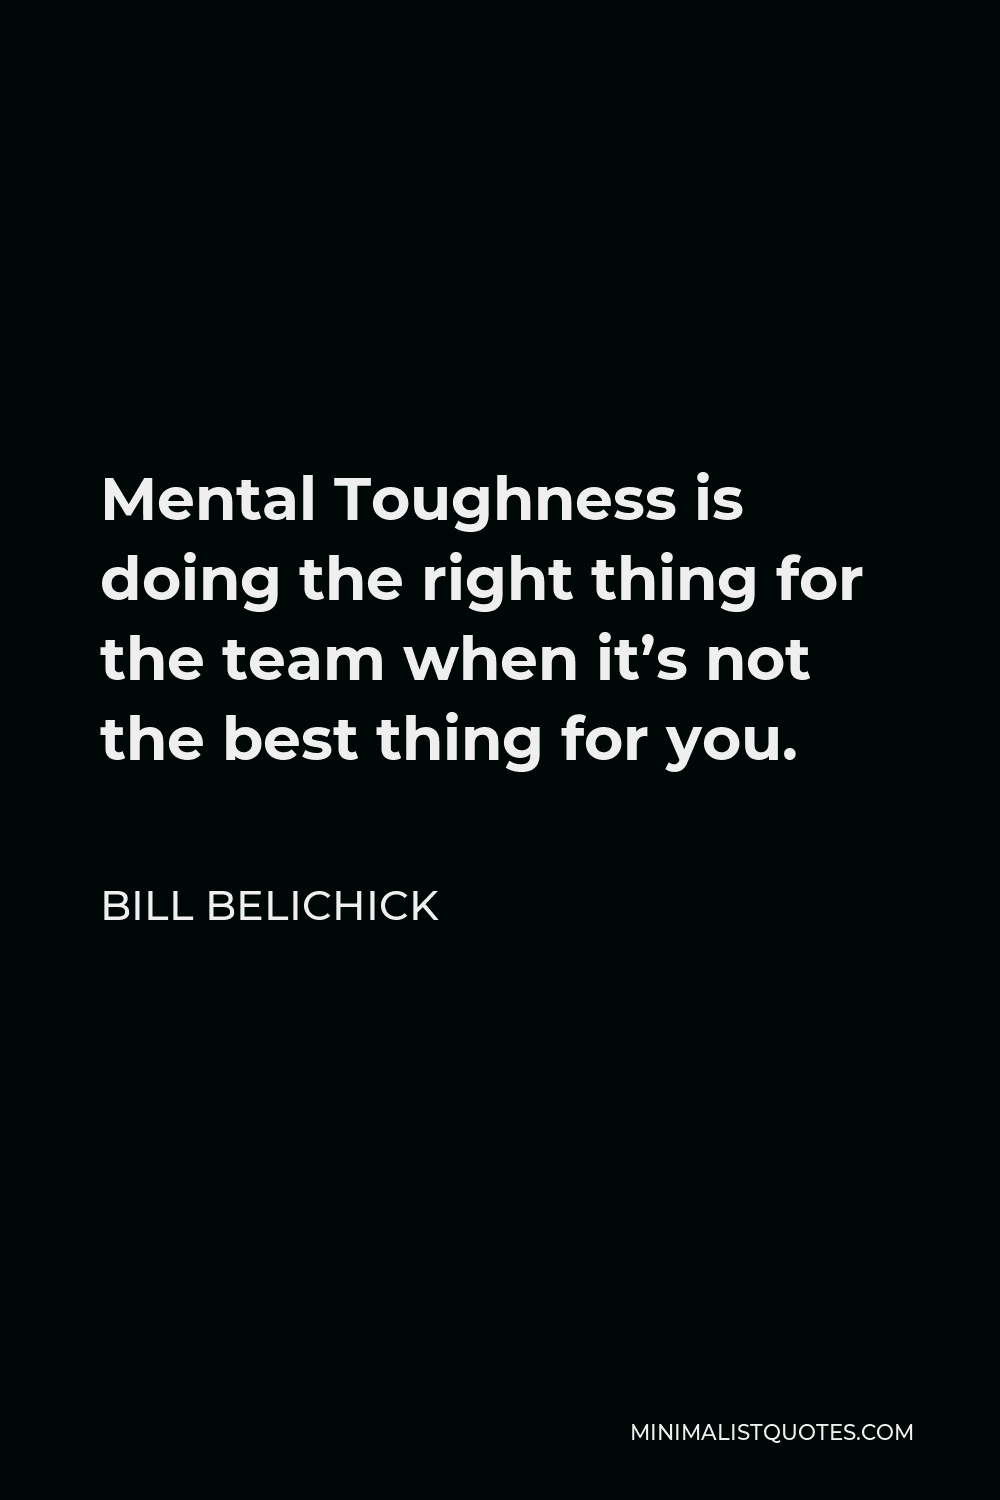 Bill Belichick Quote - Mental Toughness is doing the right thing for the team when it’s not the best thing for you.